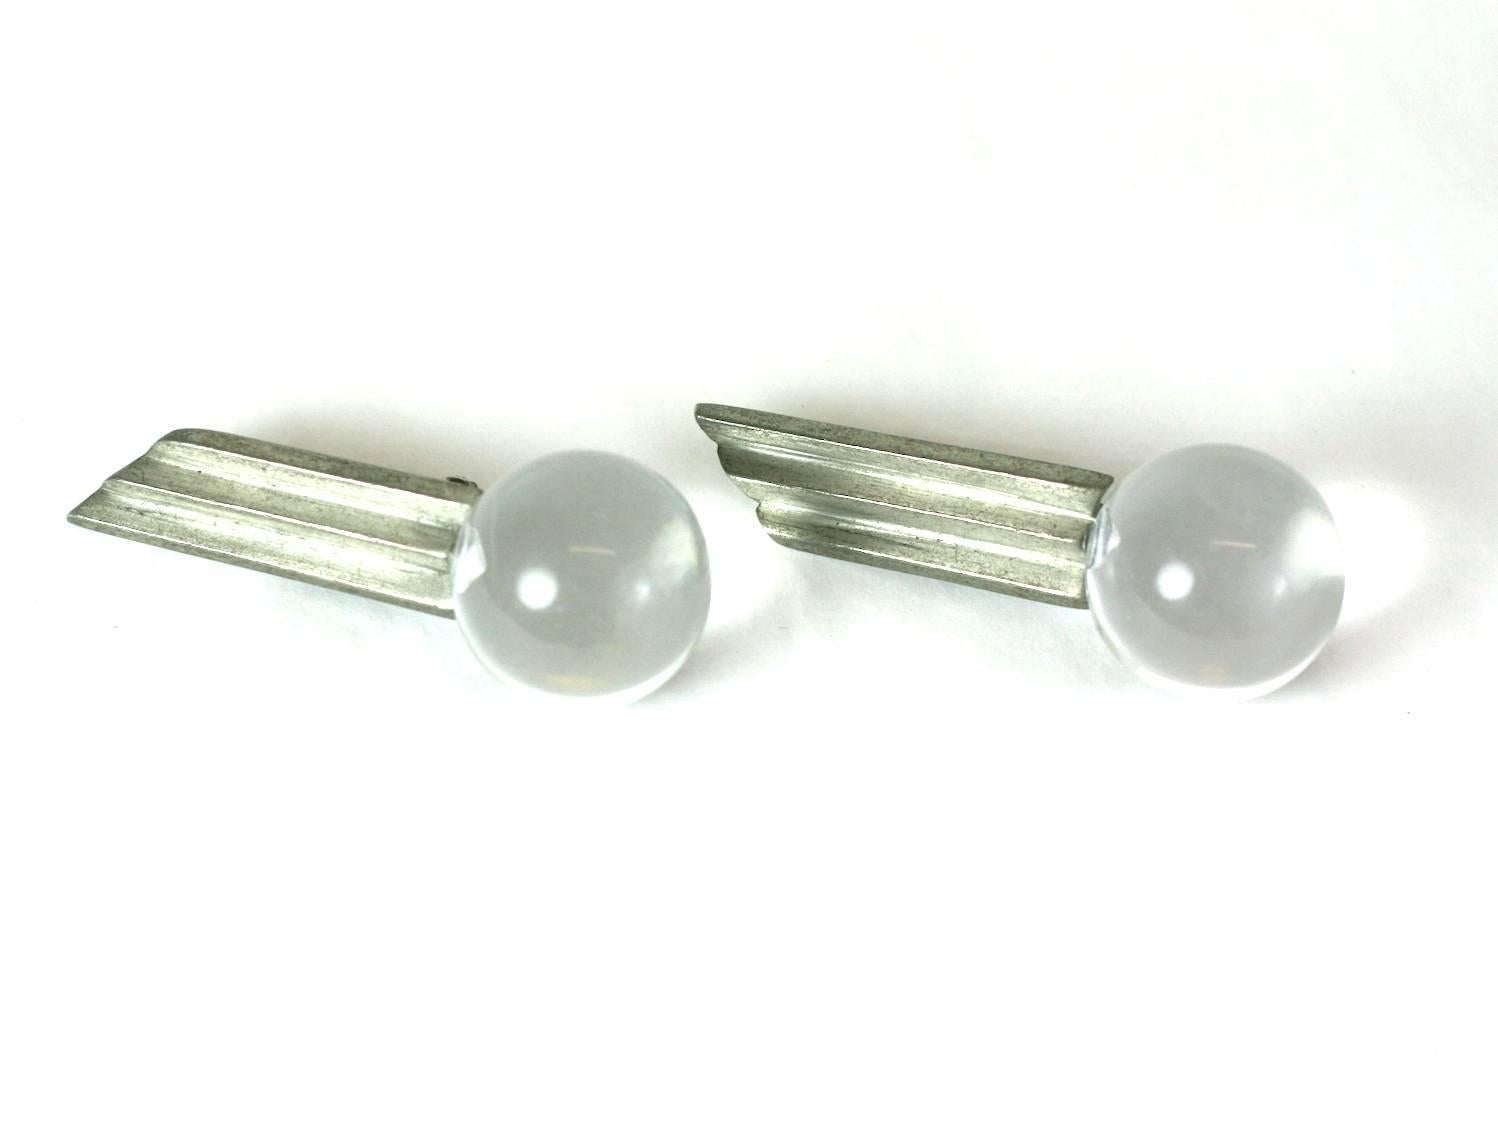 Unusual Deco Style Lucite ball ear clips from the 1980's designed to be worn at an angle up the ear. Pewter toned step motif ends in a large lucite ball, with clip back fittings. 1980's USA. 2.25